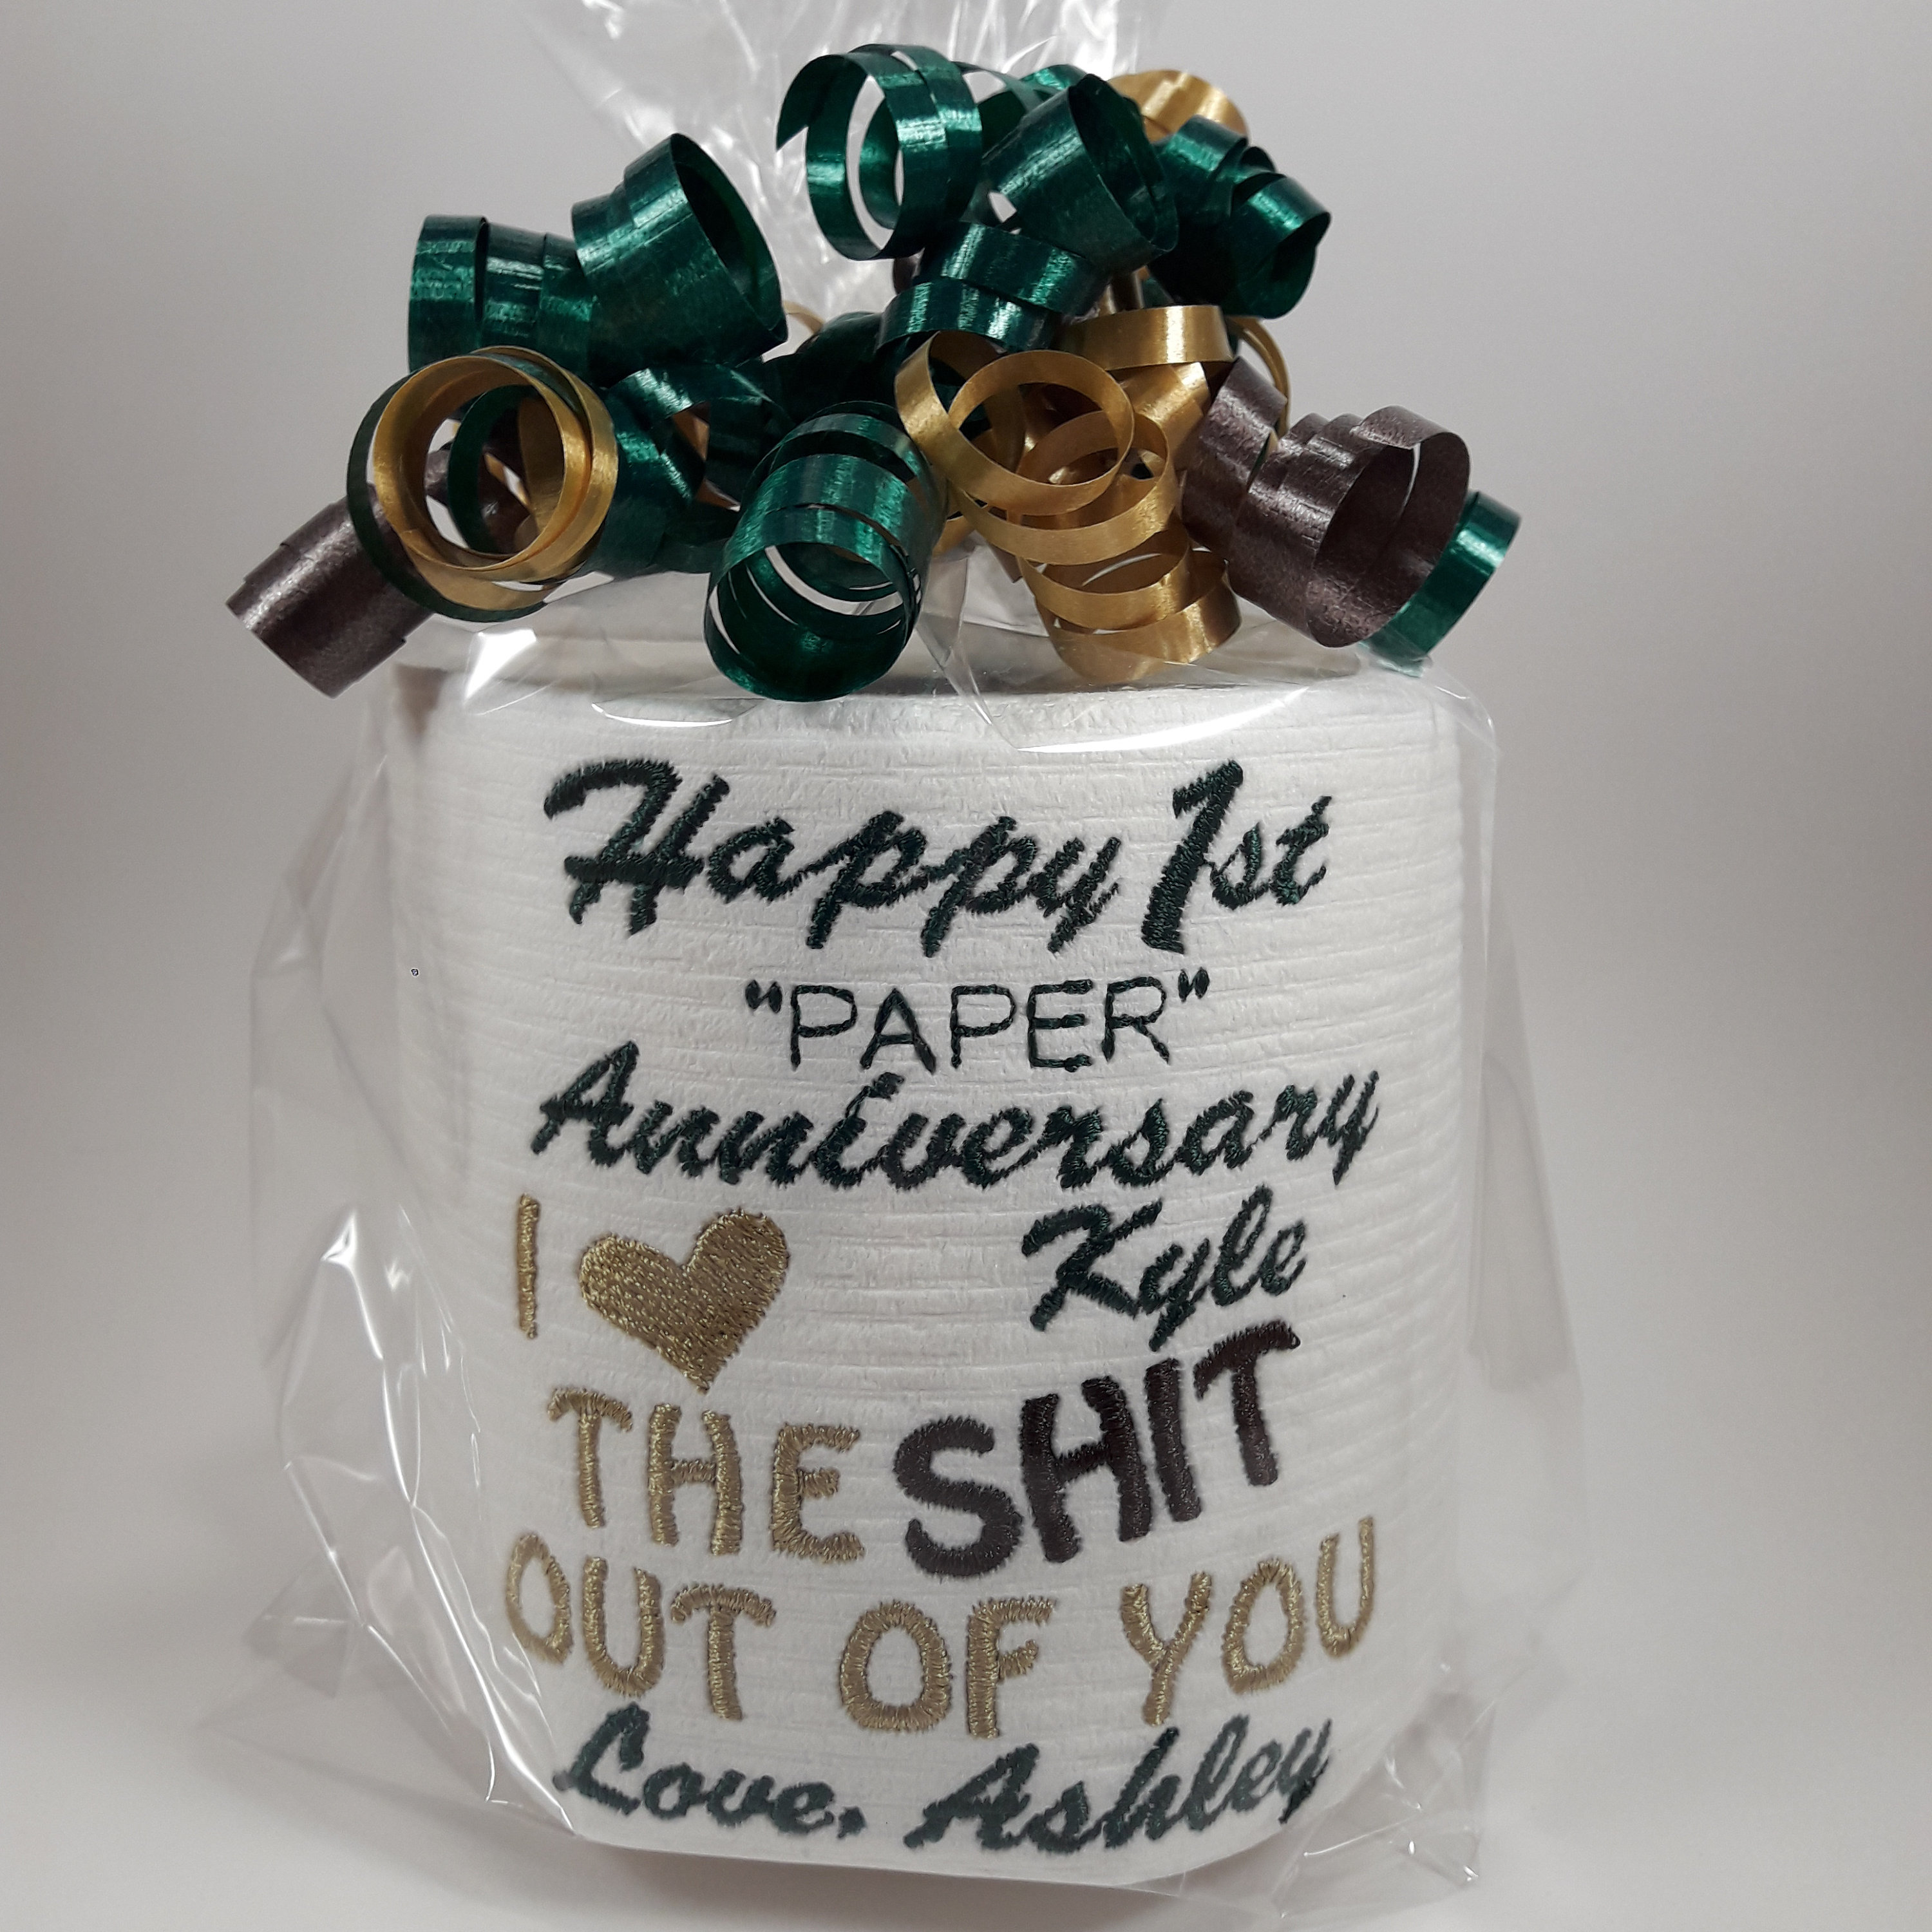 Anniversary 1st Anniversary - paper themed gift box idea for husband  Toilet…  Paper wedding anniversary gift, Paper gifts anniversary, 1 year anniversary  gifts